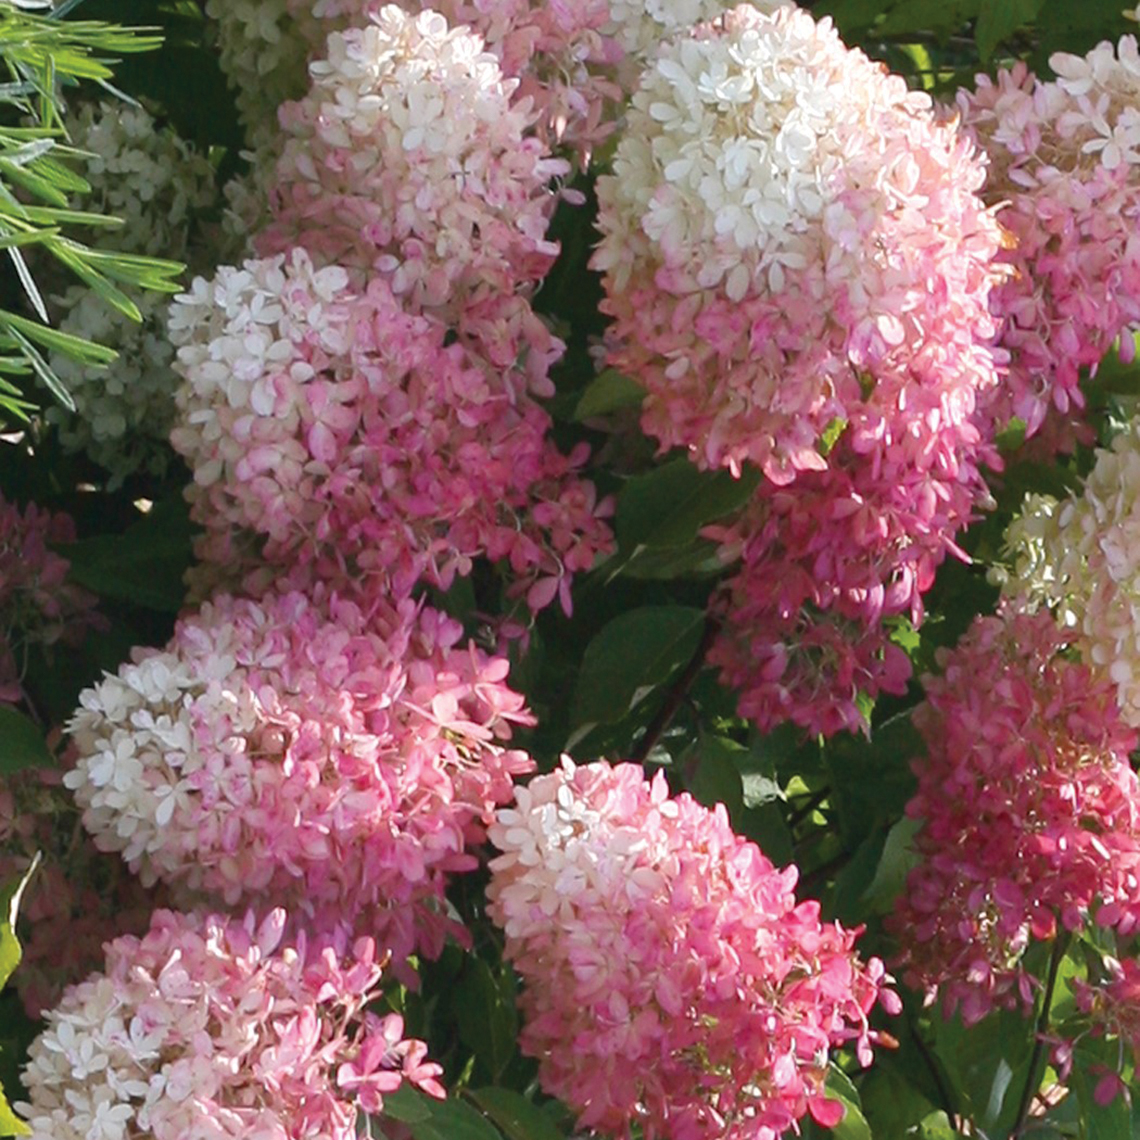 Closeup of the pink and white mophead flowers of Zinfin Doll panicle hydrangea showing the unique shaded effect